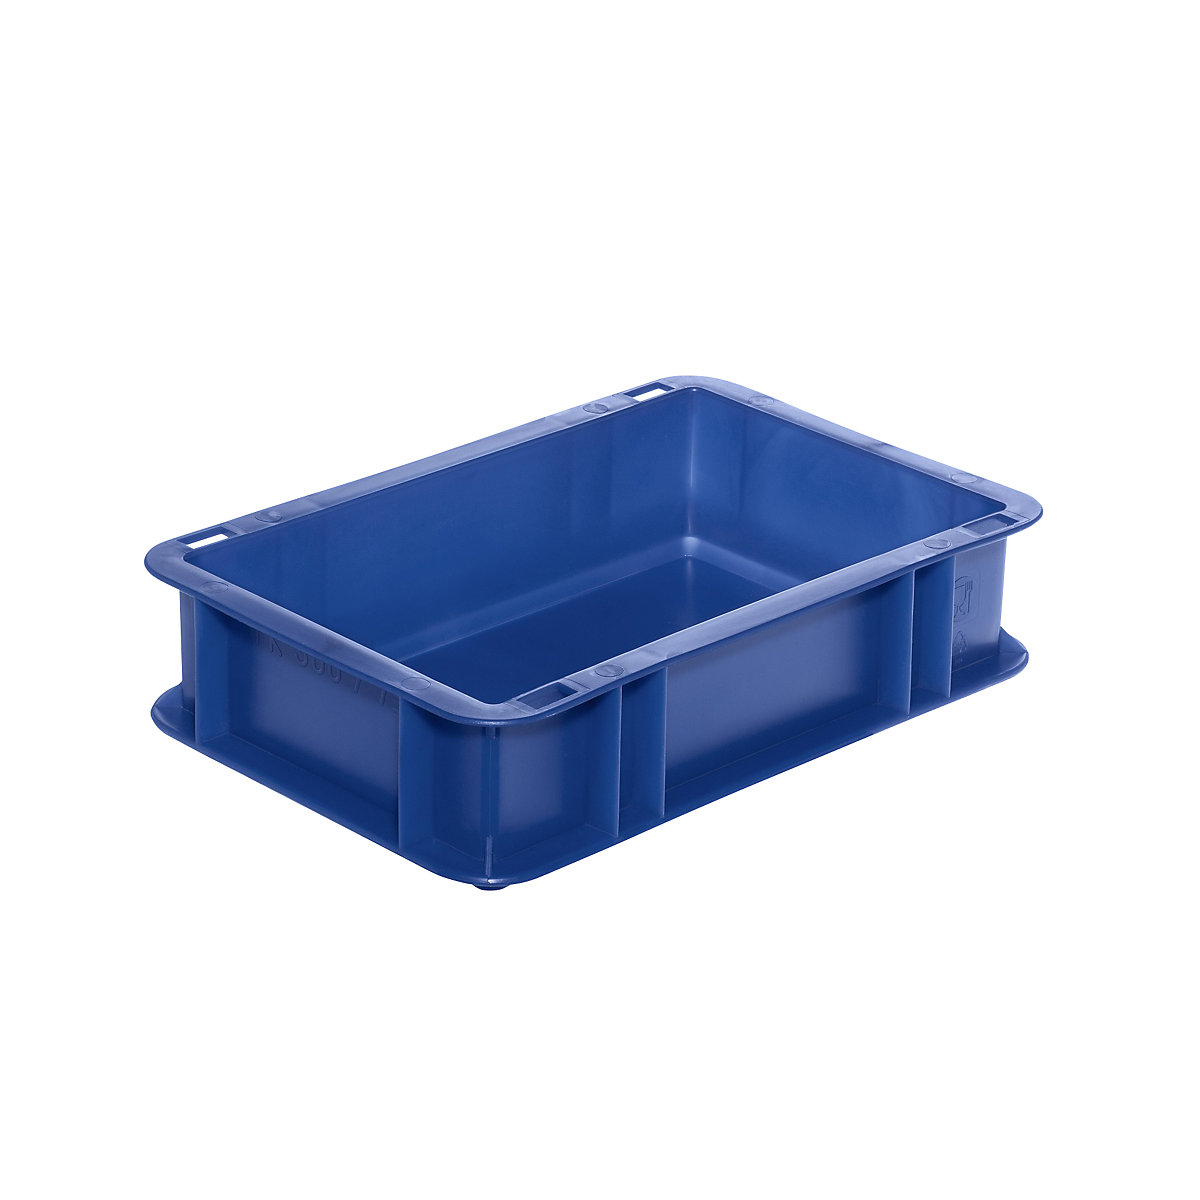 Euro stacking container, closed walls and base, LxWxH 300 x 200 x 75 mm, blue, pack of 5